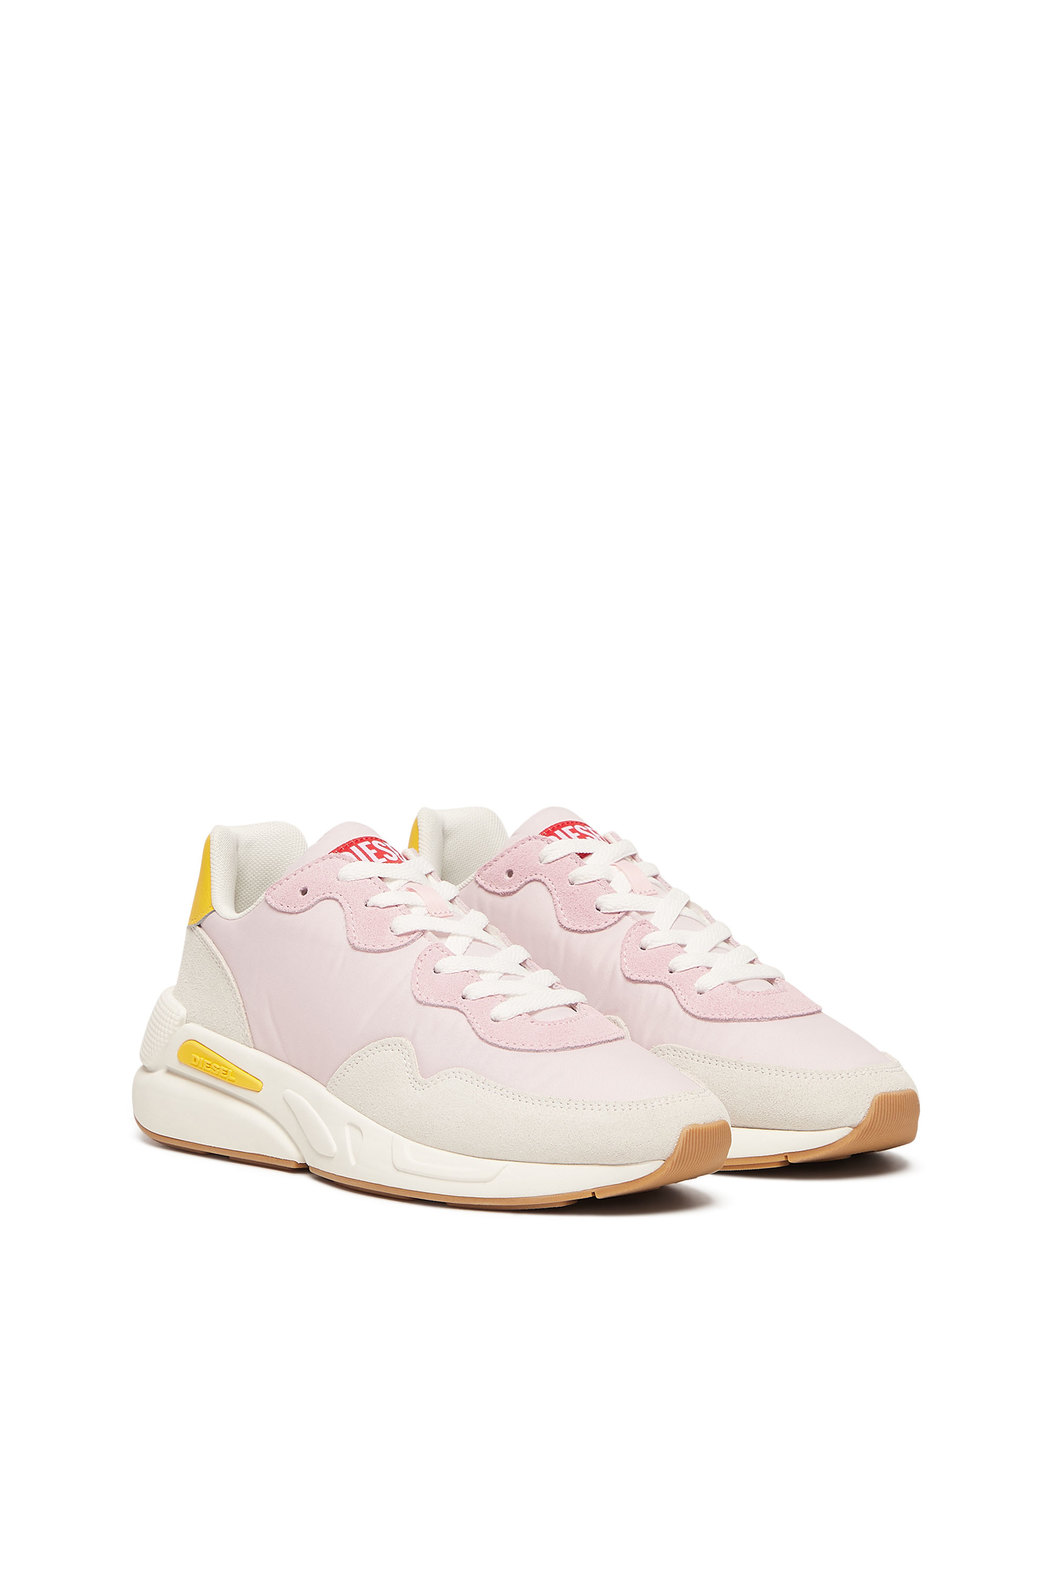 S-Serendipity Light W - Sneakers with contoured panels